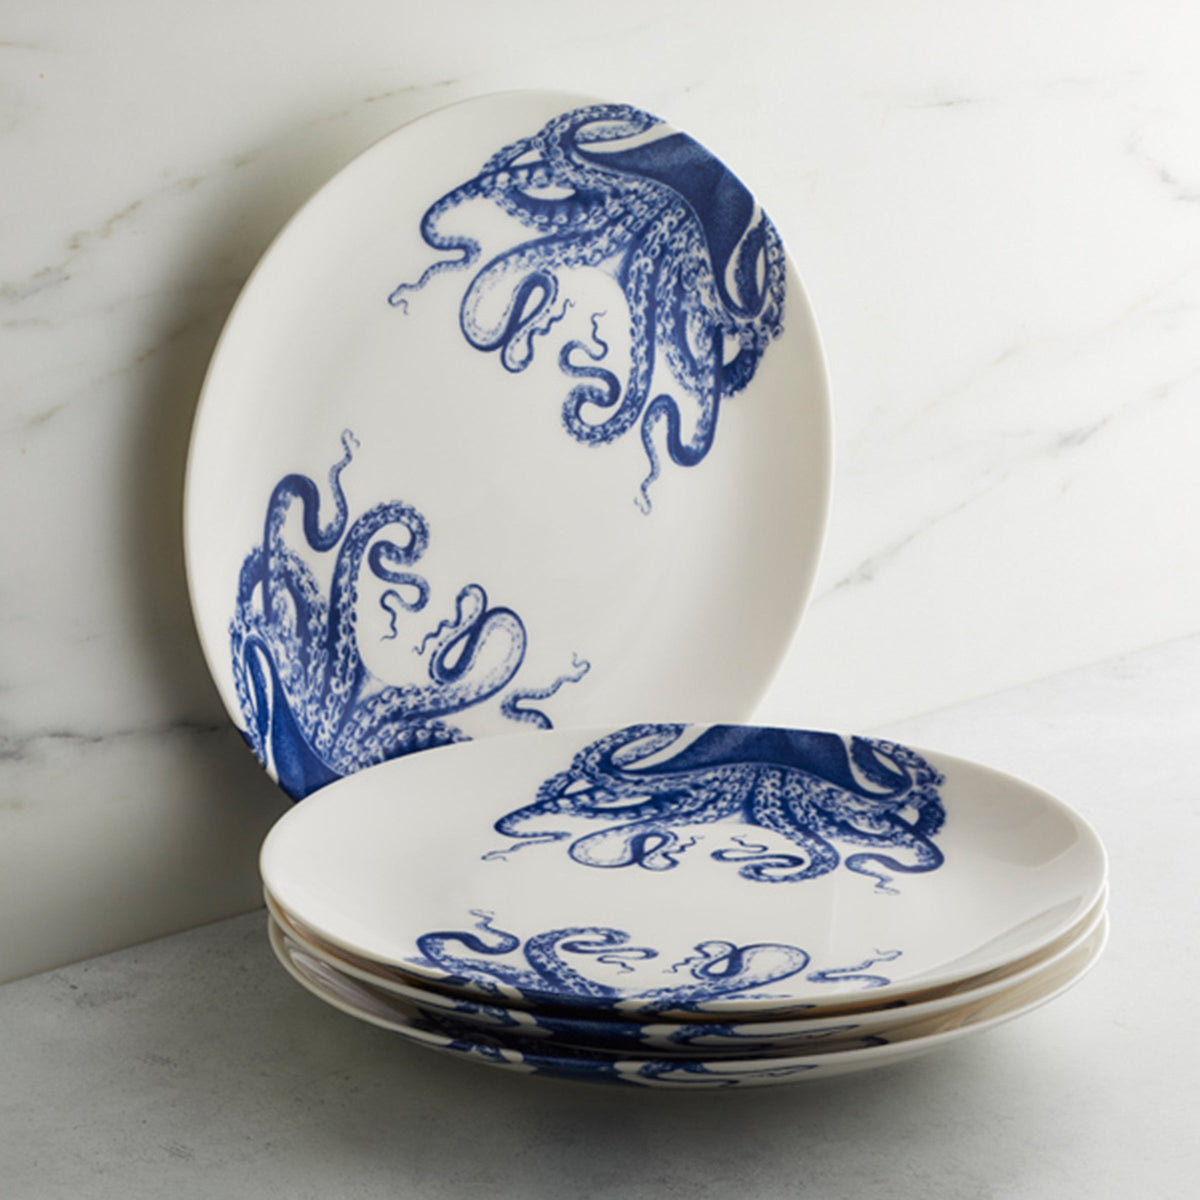 A set of Lucy Blue Coupe Dinner Plates with octopus designs, crafted from premium porcelain, by Caskata Artisanal Home.